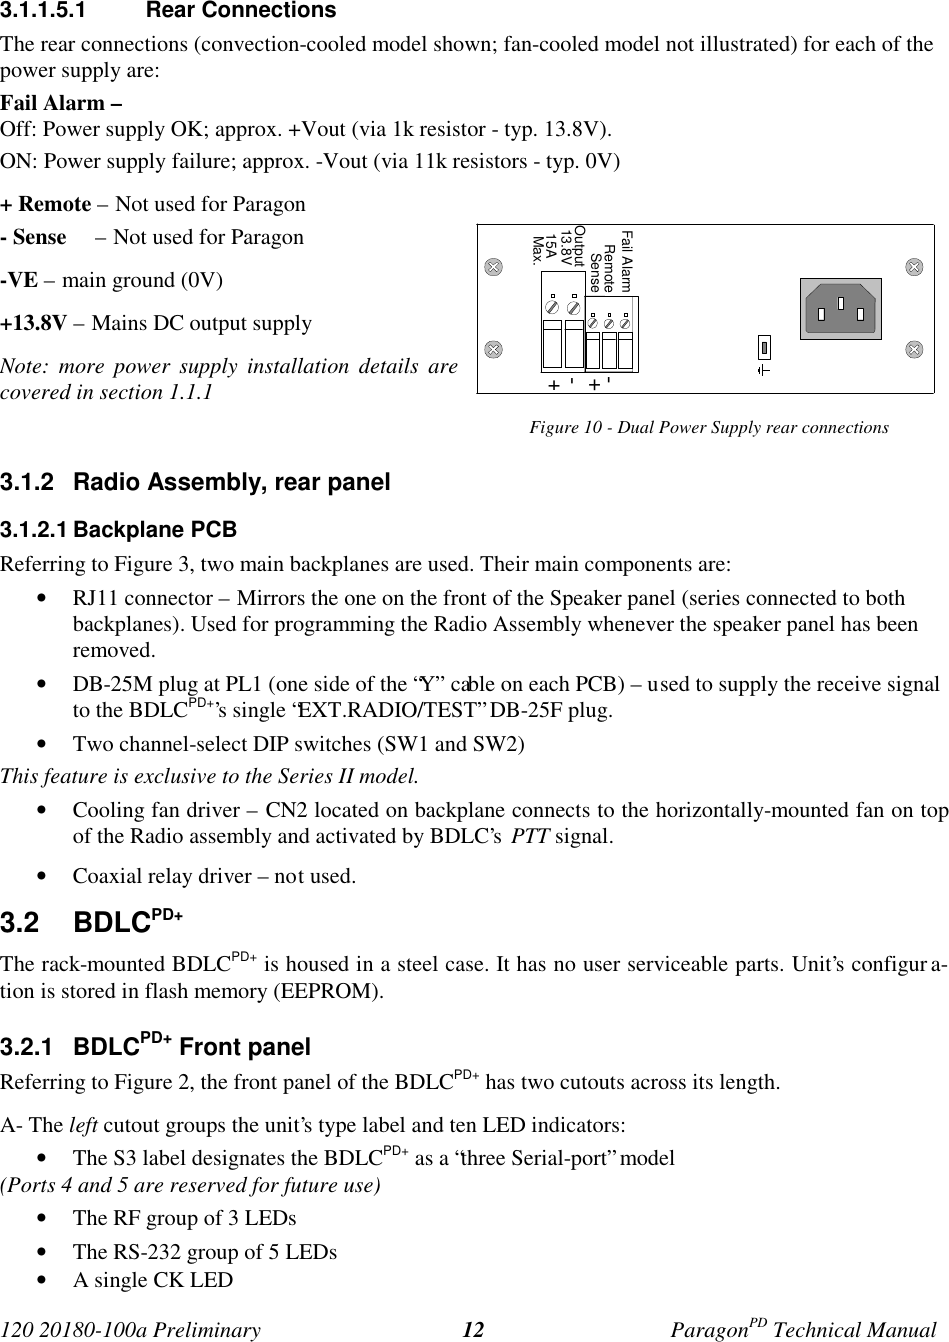 Page 19 of CalAmp Wireless Networks BDD4T85-3 ParagonPD User Manual Parg PD  T100a Prelim